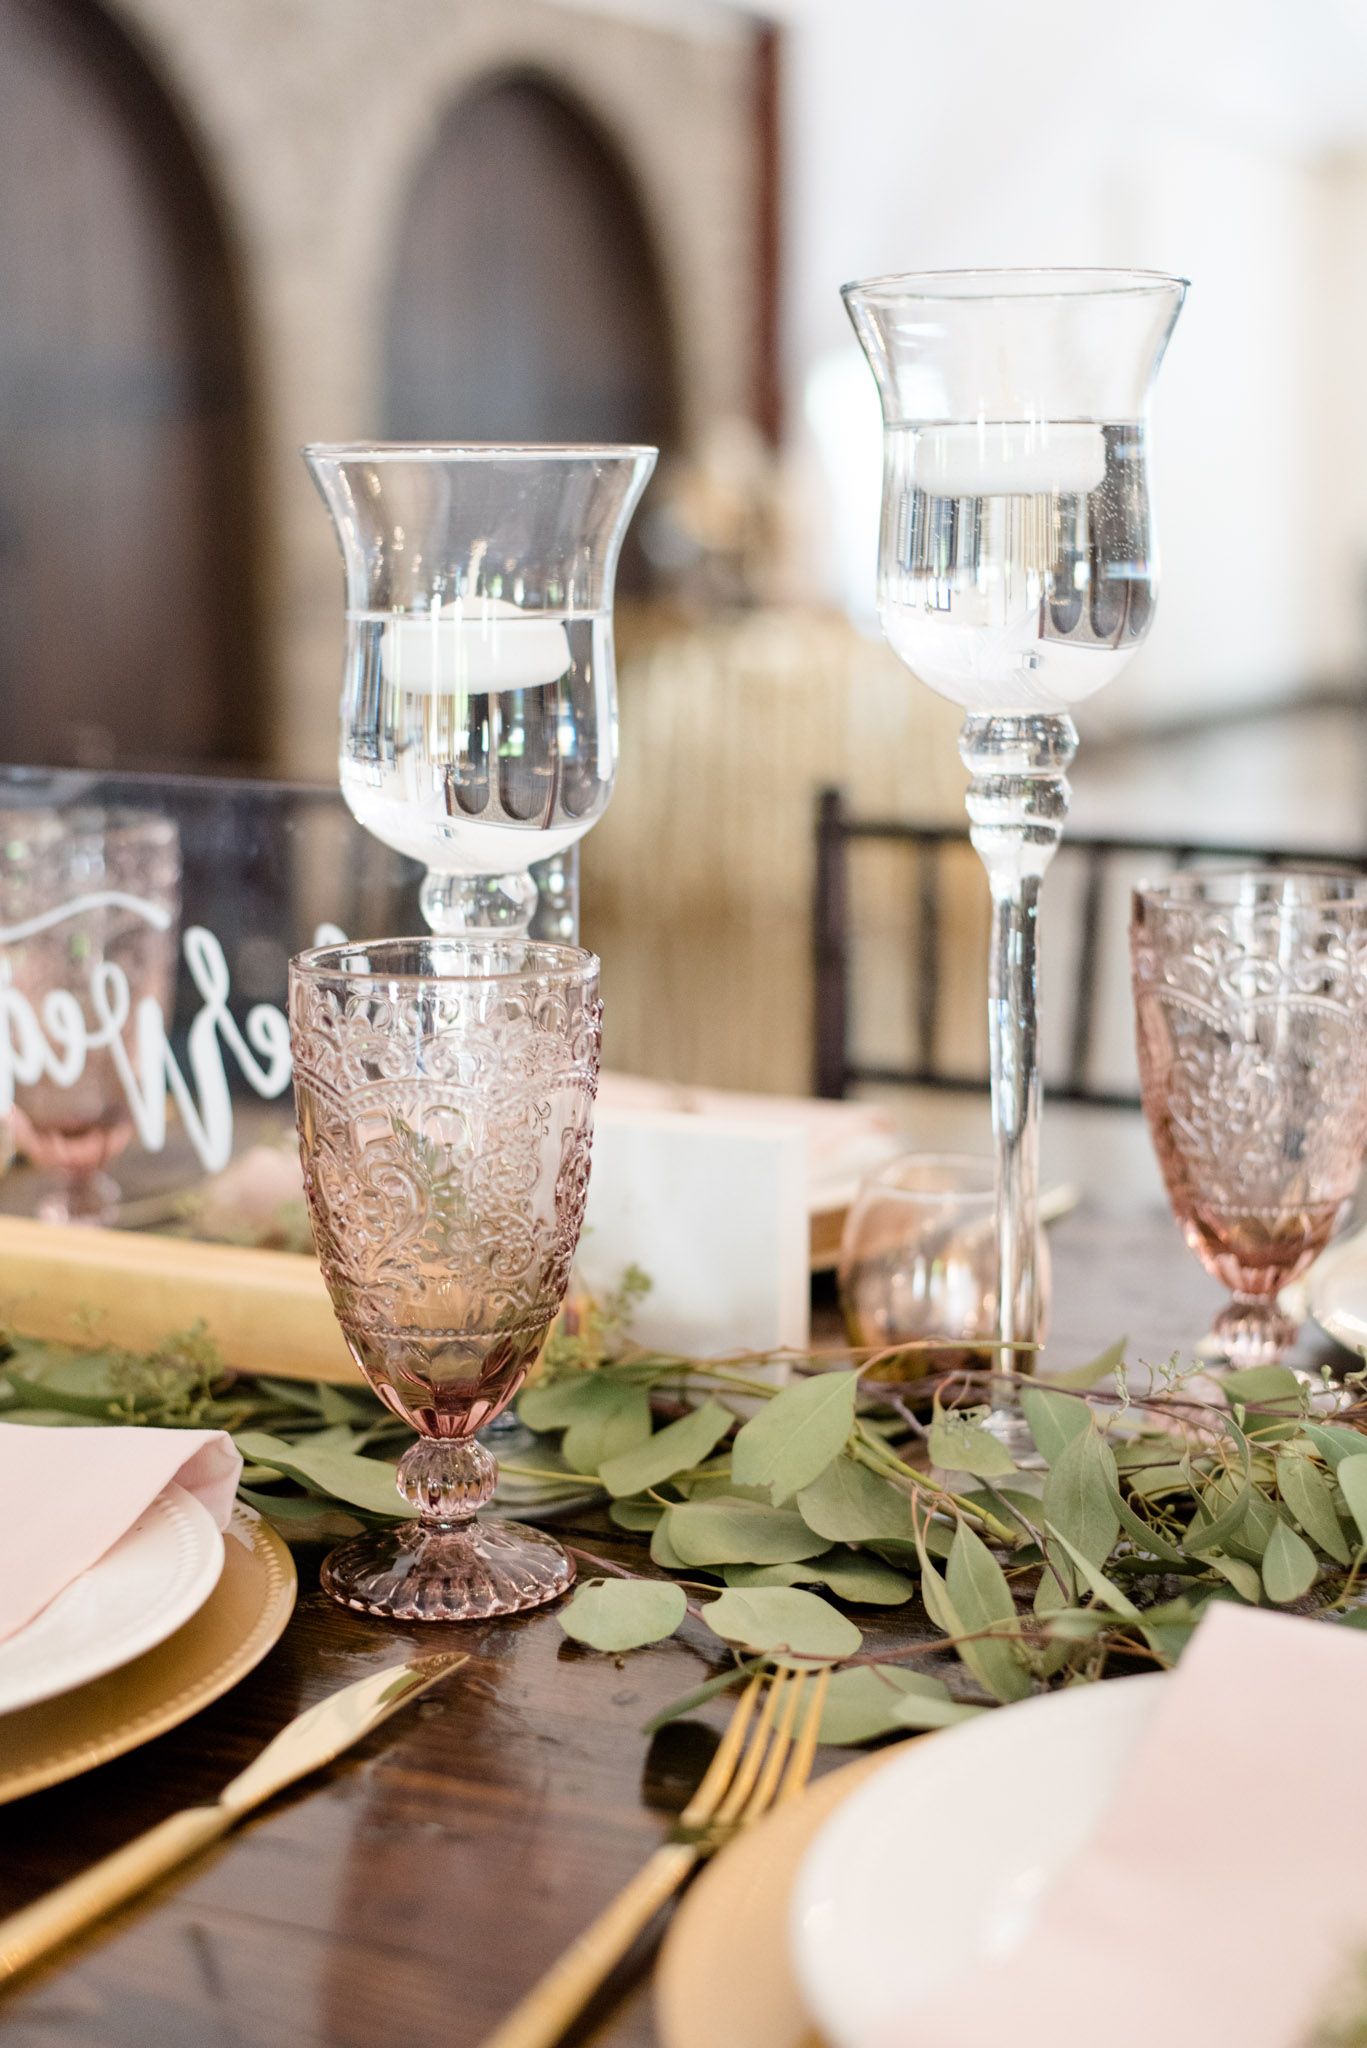 Pink drinking glasses and candles sit on table.